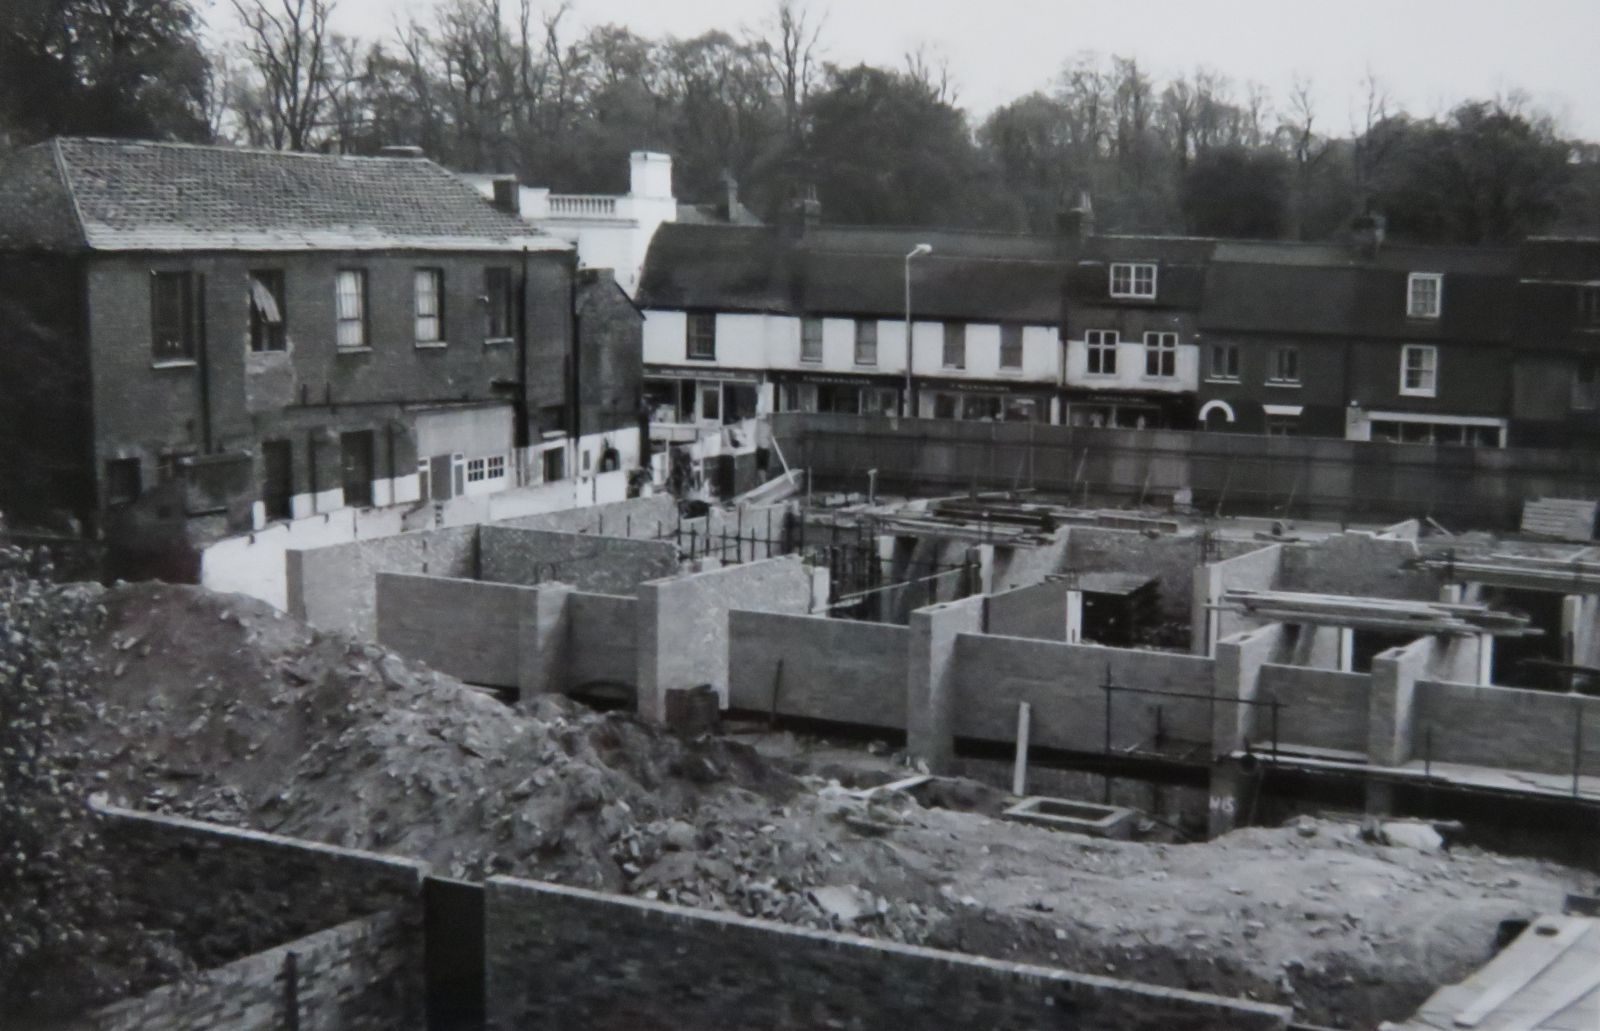 Photograph of the building site at Manor Place taken by Denis Griffiths (Head Porter). (Archive ref: JCAD-3-CAM-KING-14-5-1978)